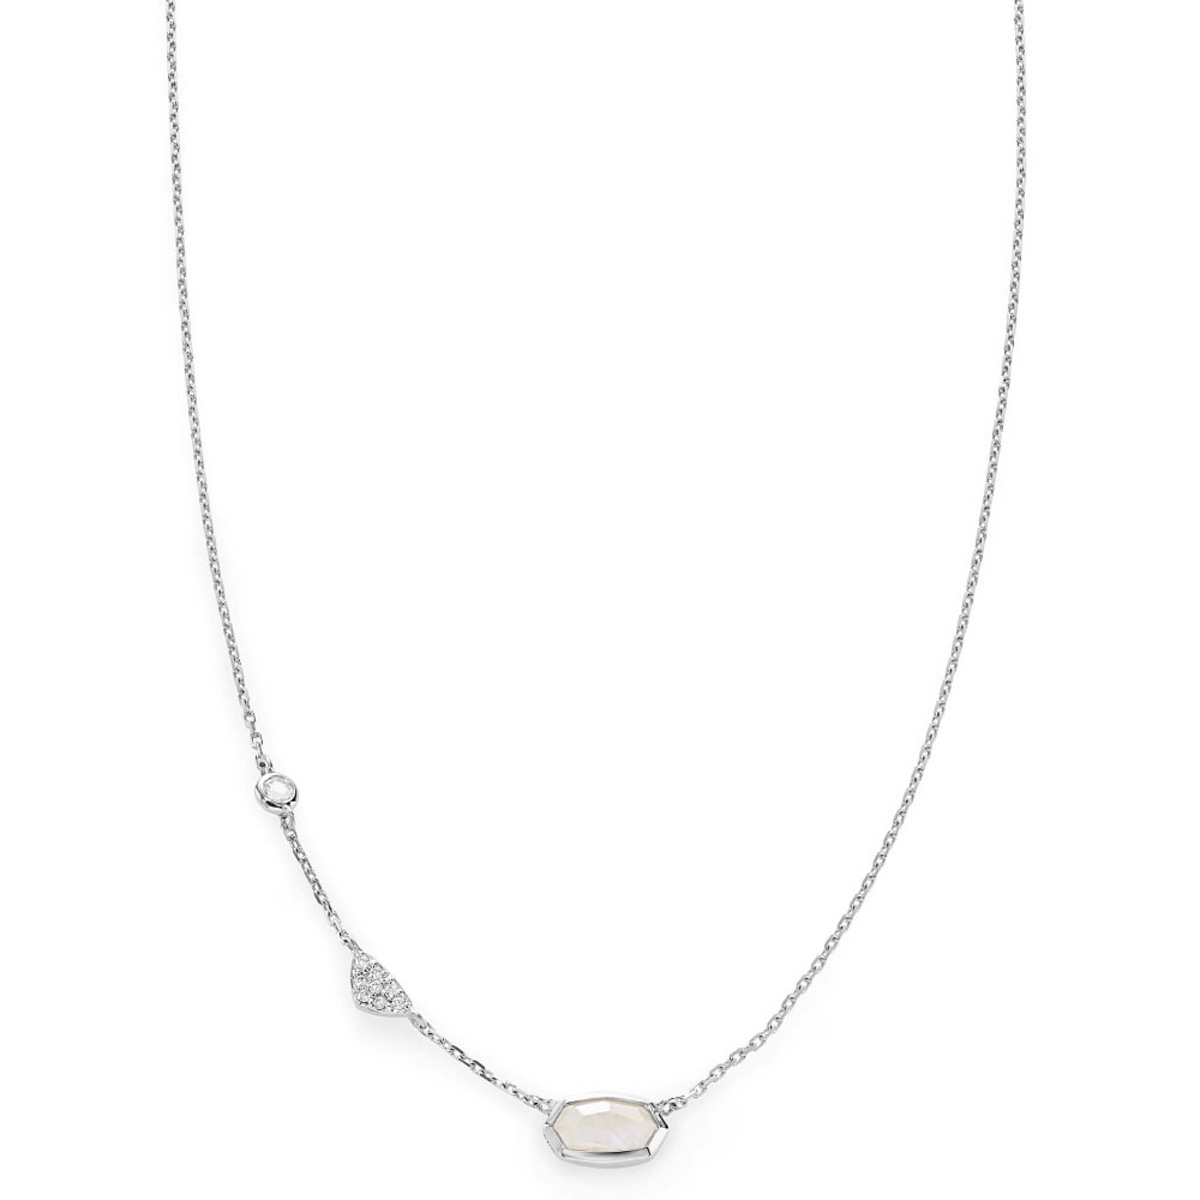 Kendra Scott Aryn Pendant Necklace in Rainbow Moonstone and 14k White ...